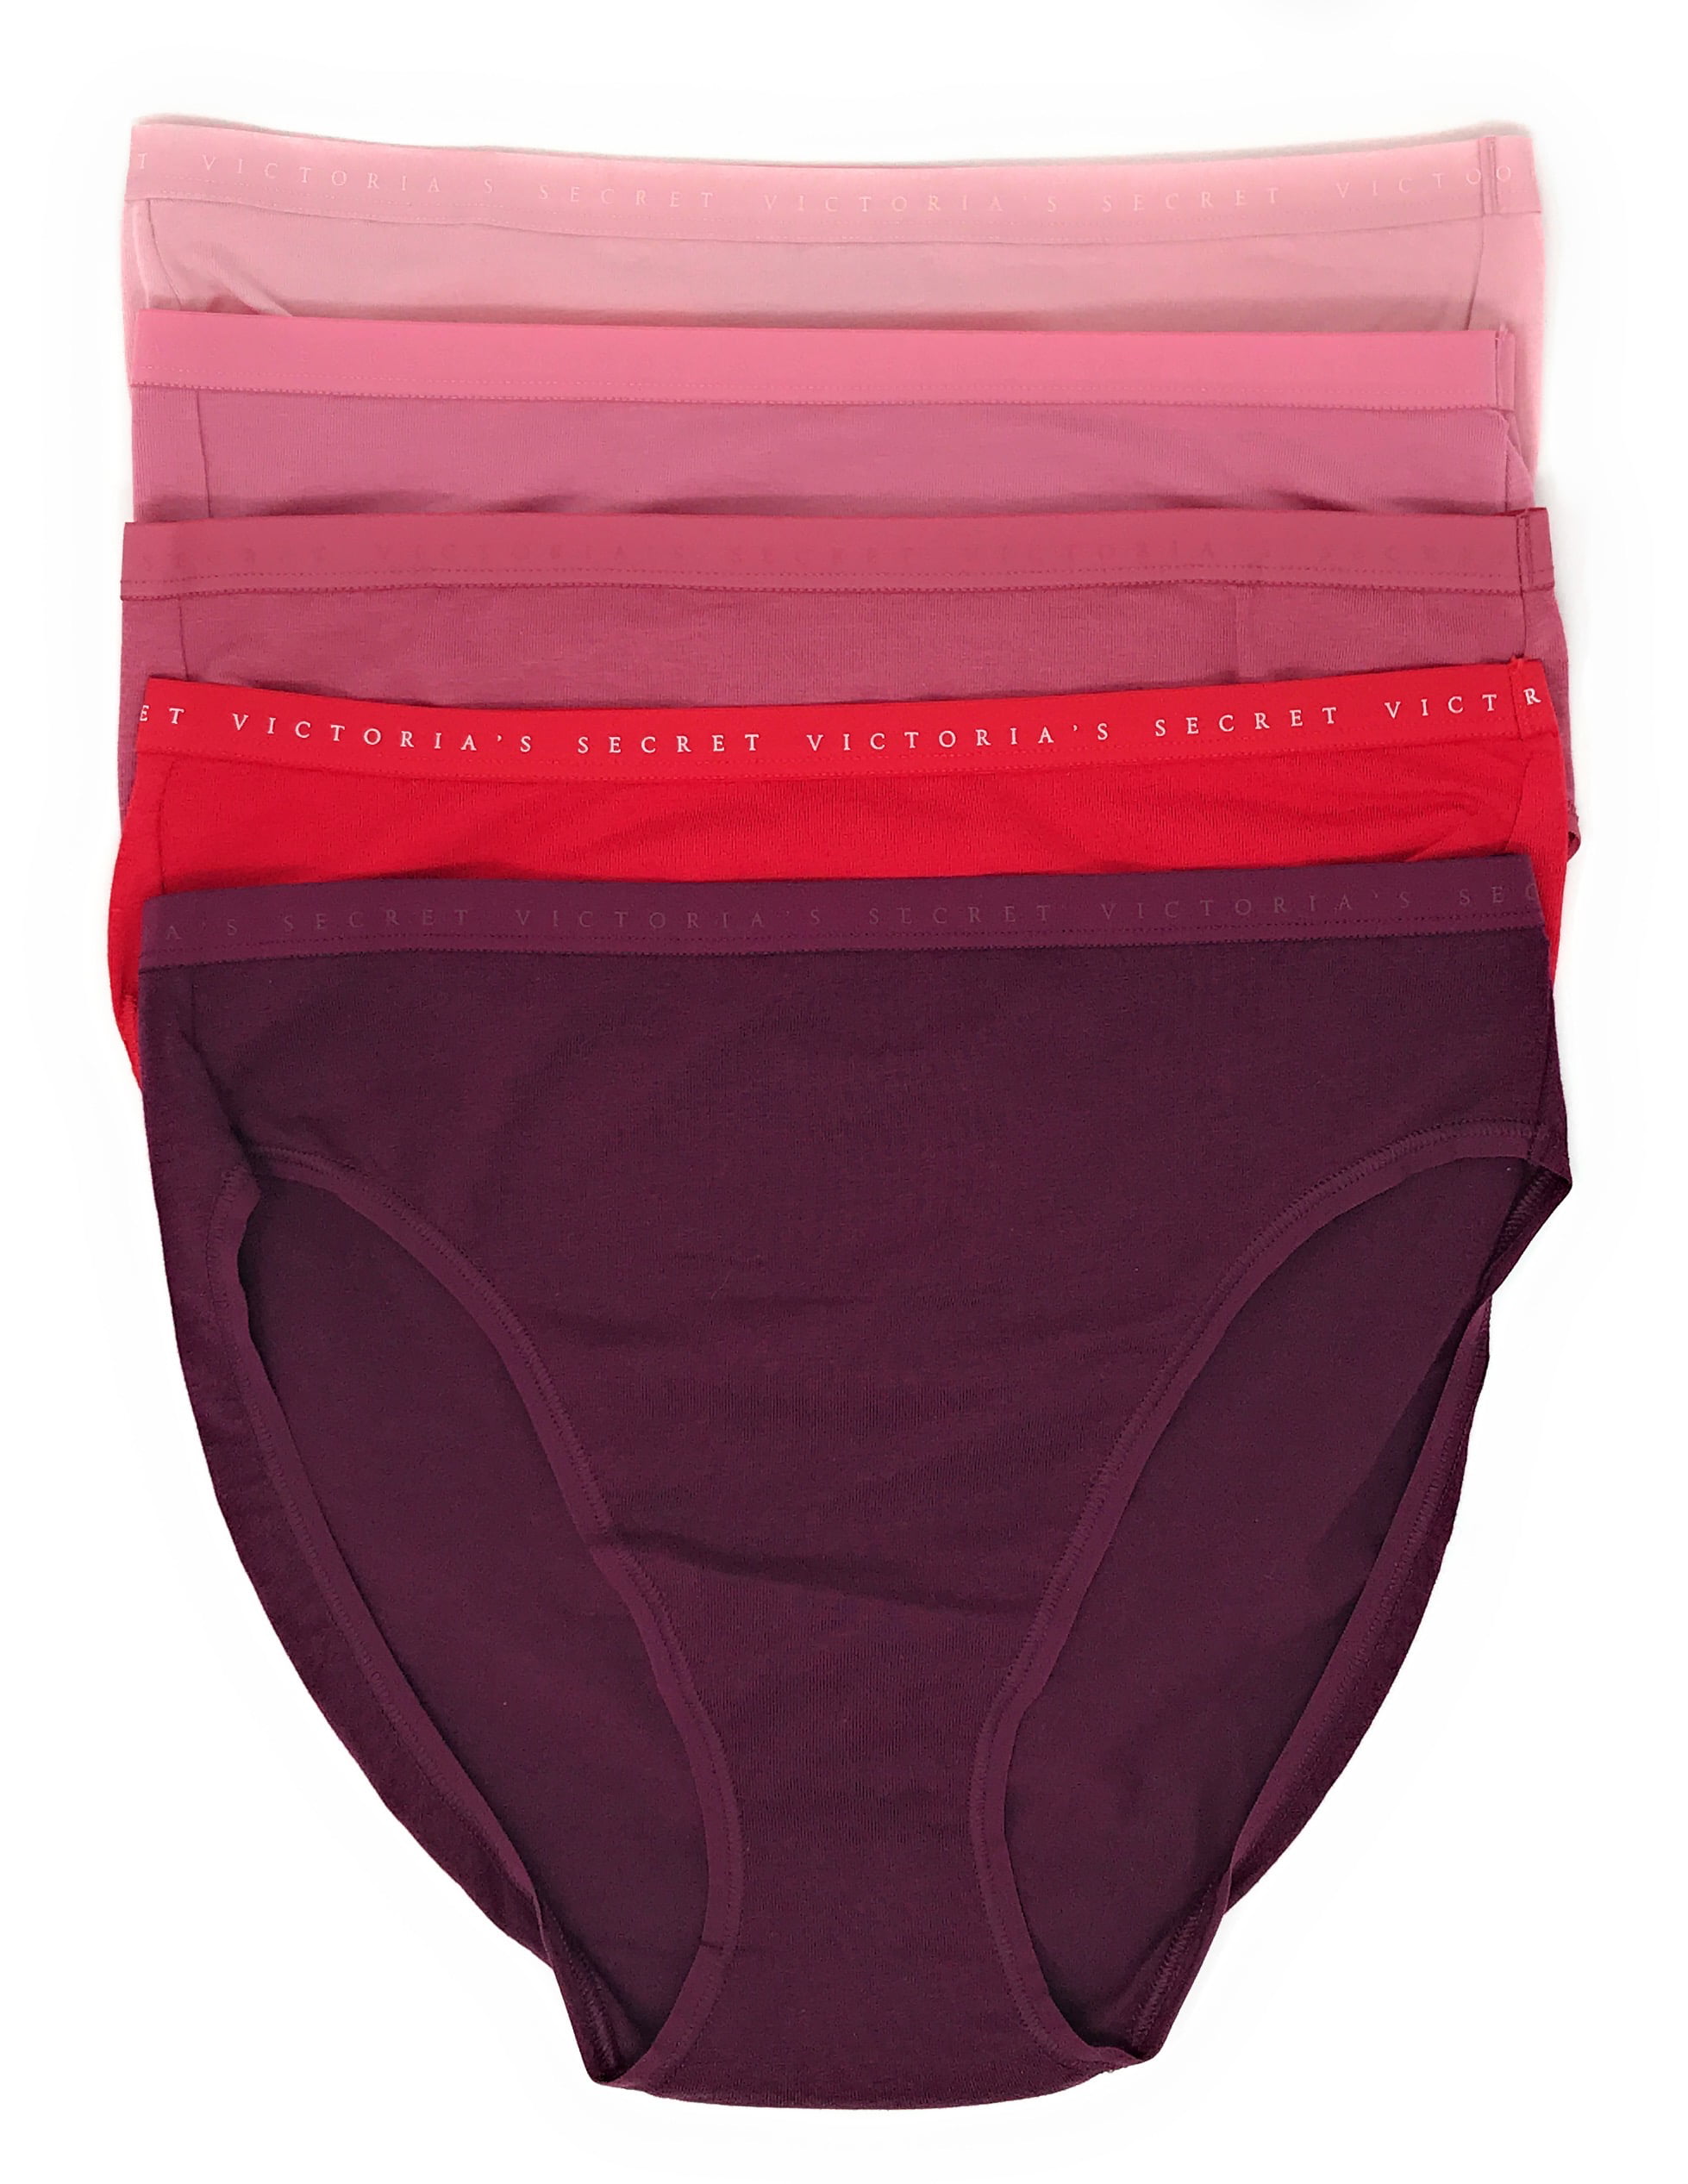 Shop High Leg Knickers Collection for Lingerie Online